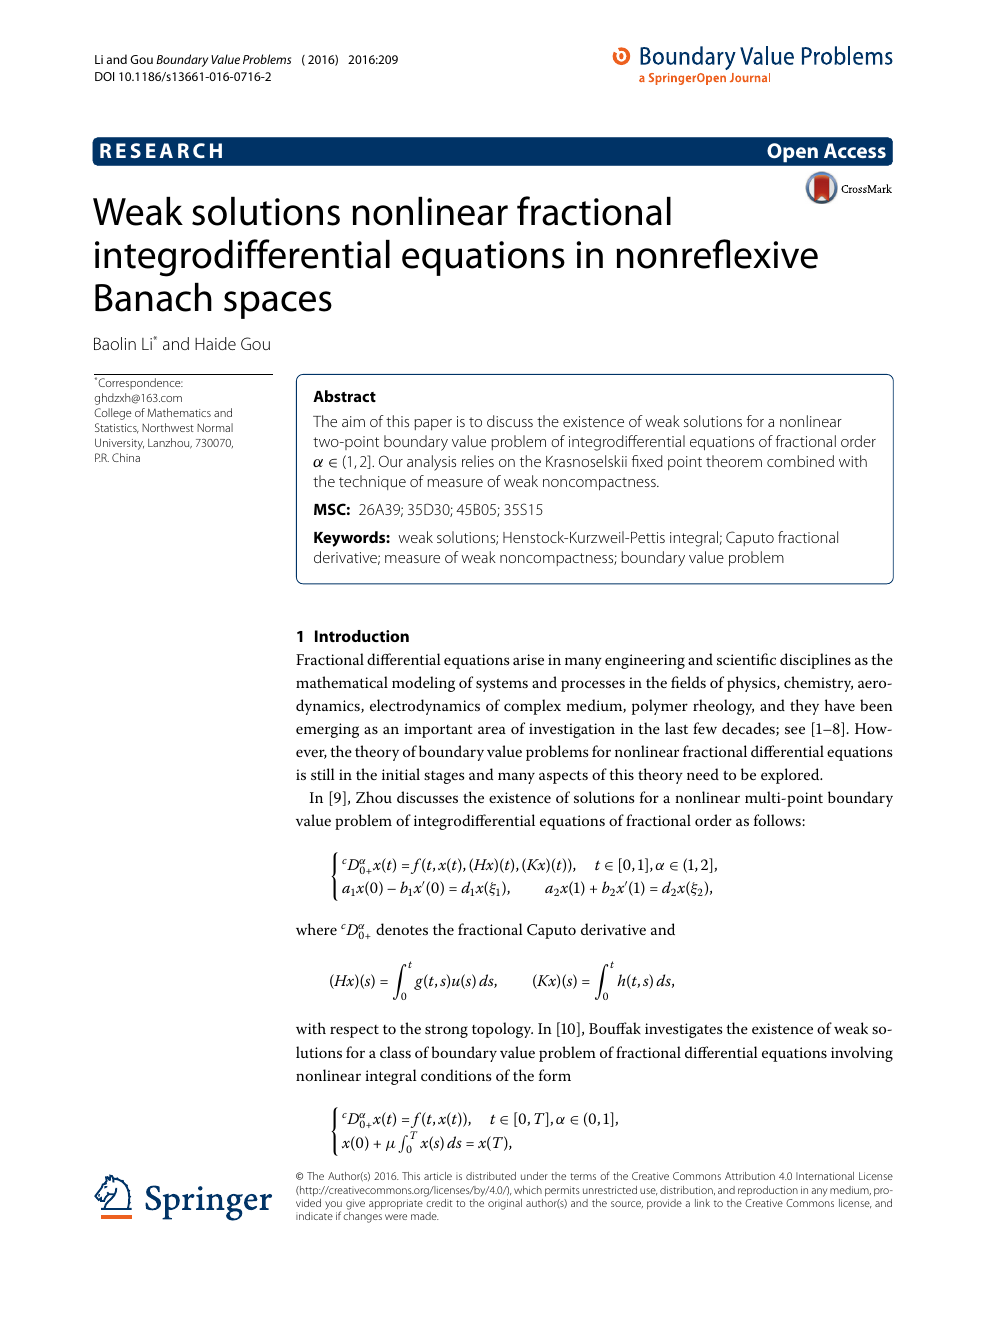 Weak Solutions Nonlinear Fractional Integrodifferential Equations In Nonreflexive Banach Spaces Topic Of Research Paper In Mathematics Download Scholarly Article Pdf And Read For Free On Cyberleninka Open Science Hub